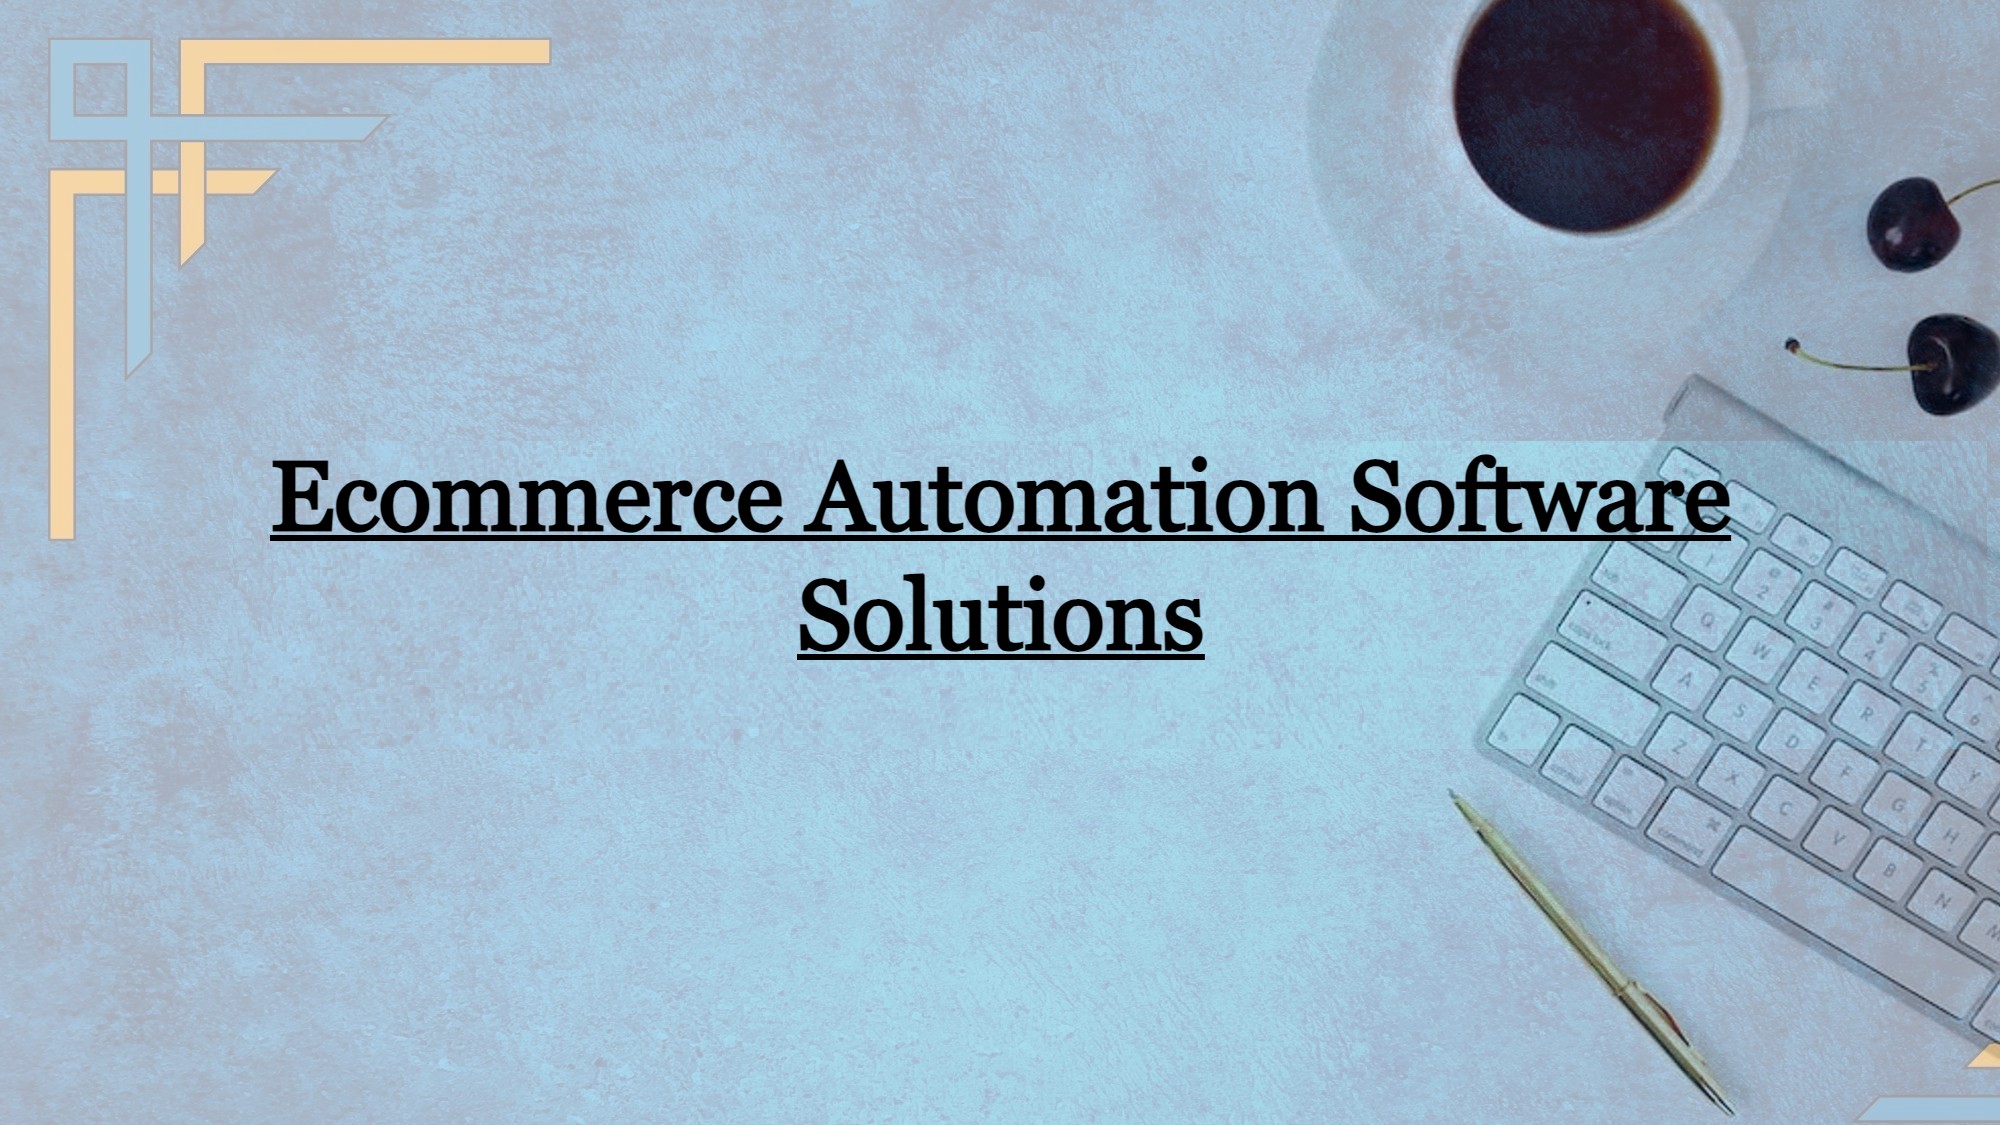 Ecommerce Automation Software Solutions